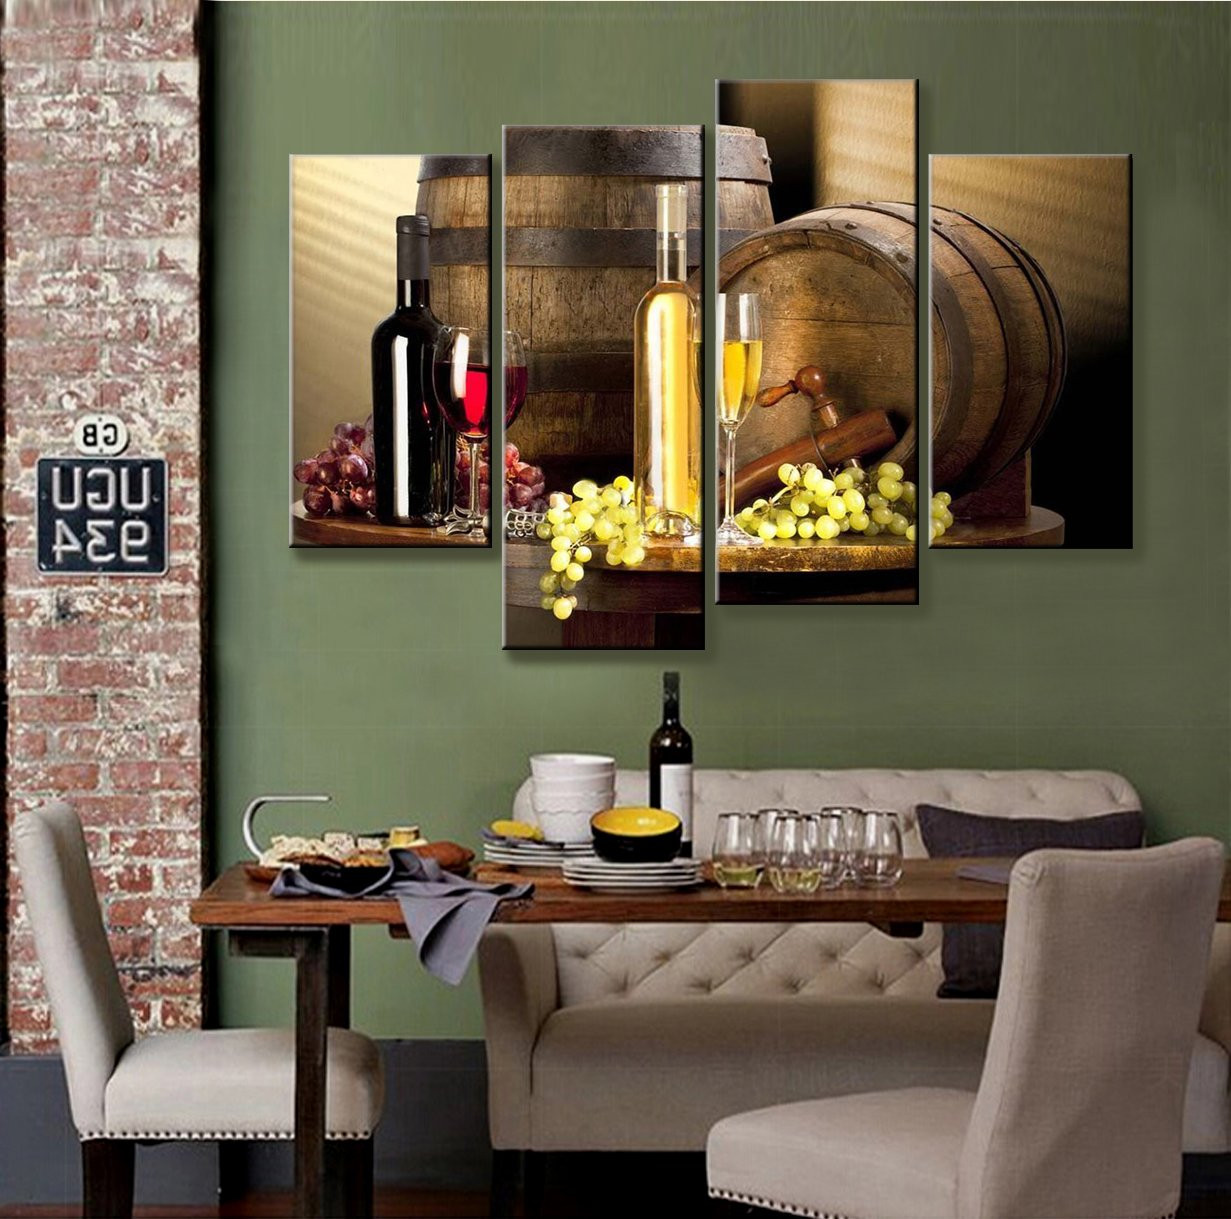 Kitchen Canvas Wall Art
 Grape and Wine Canvas Wall Art Framed Wine Canvas Print